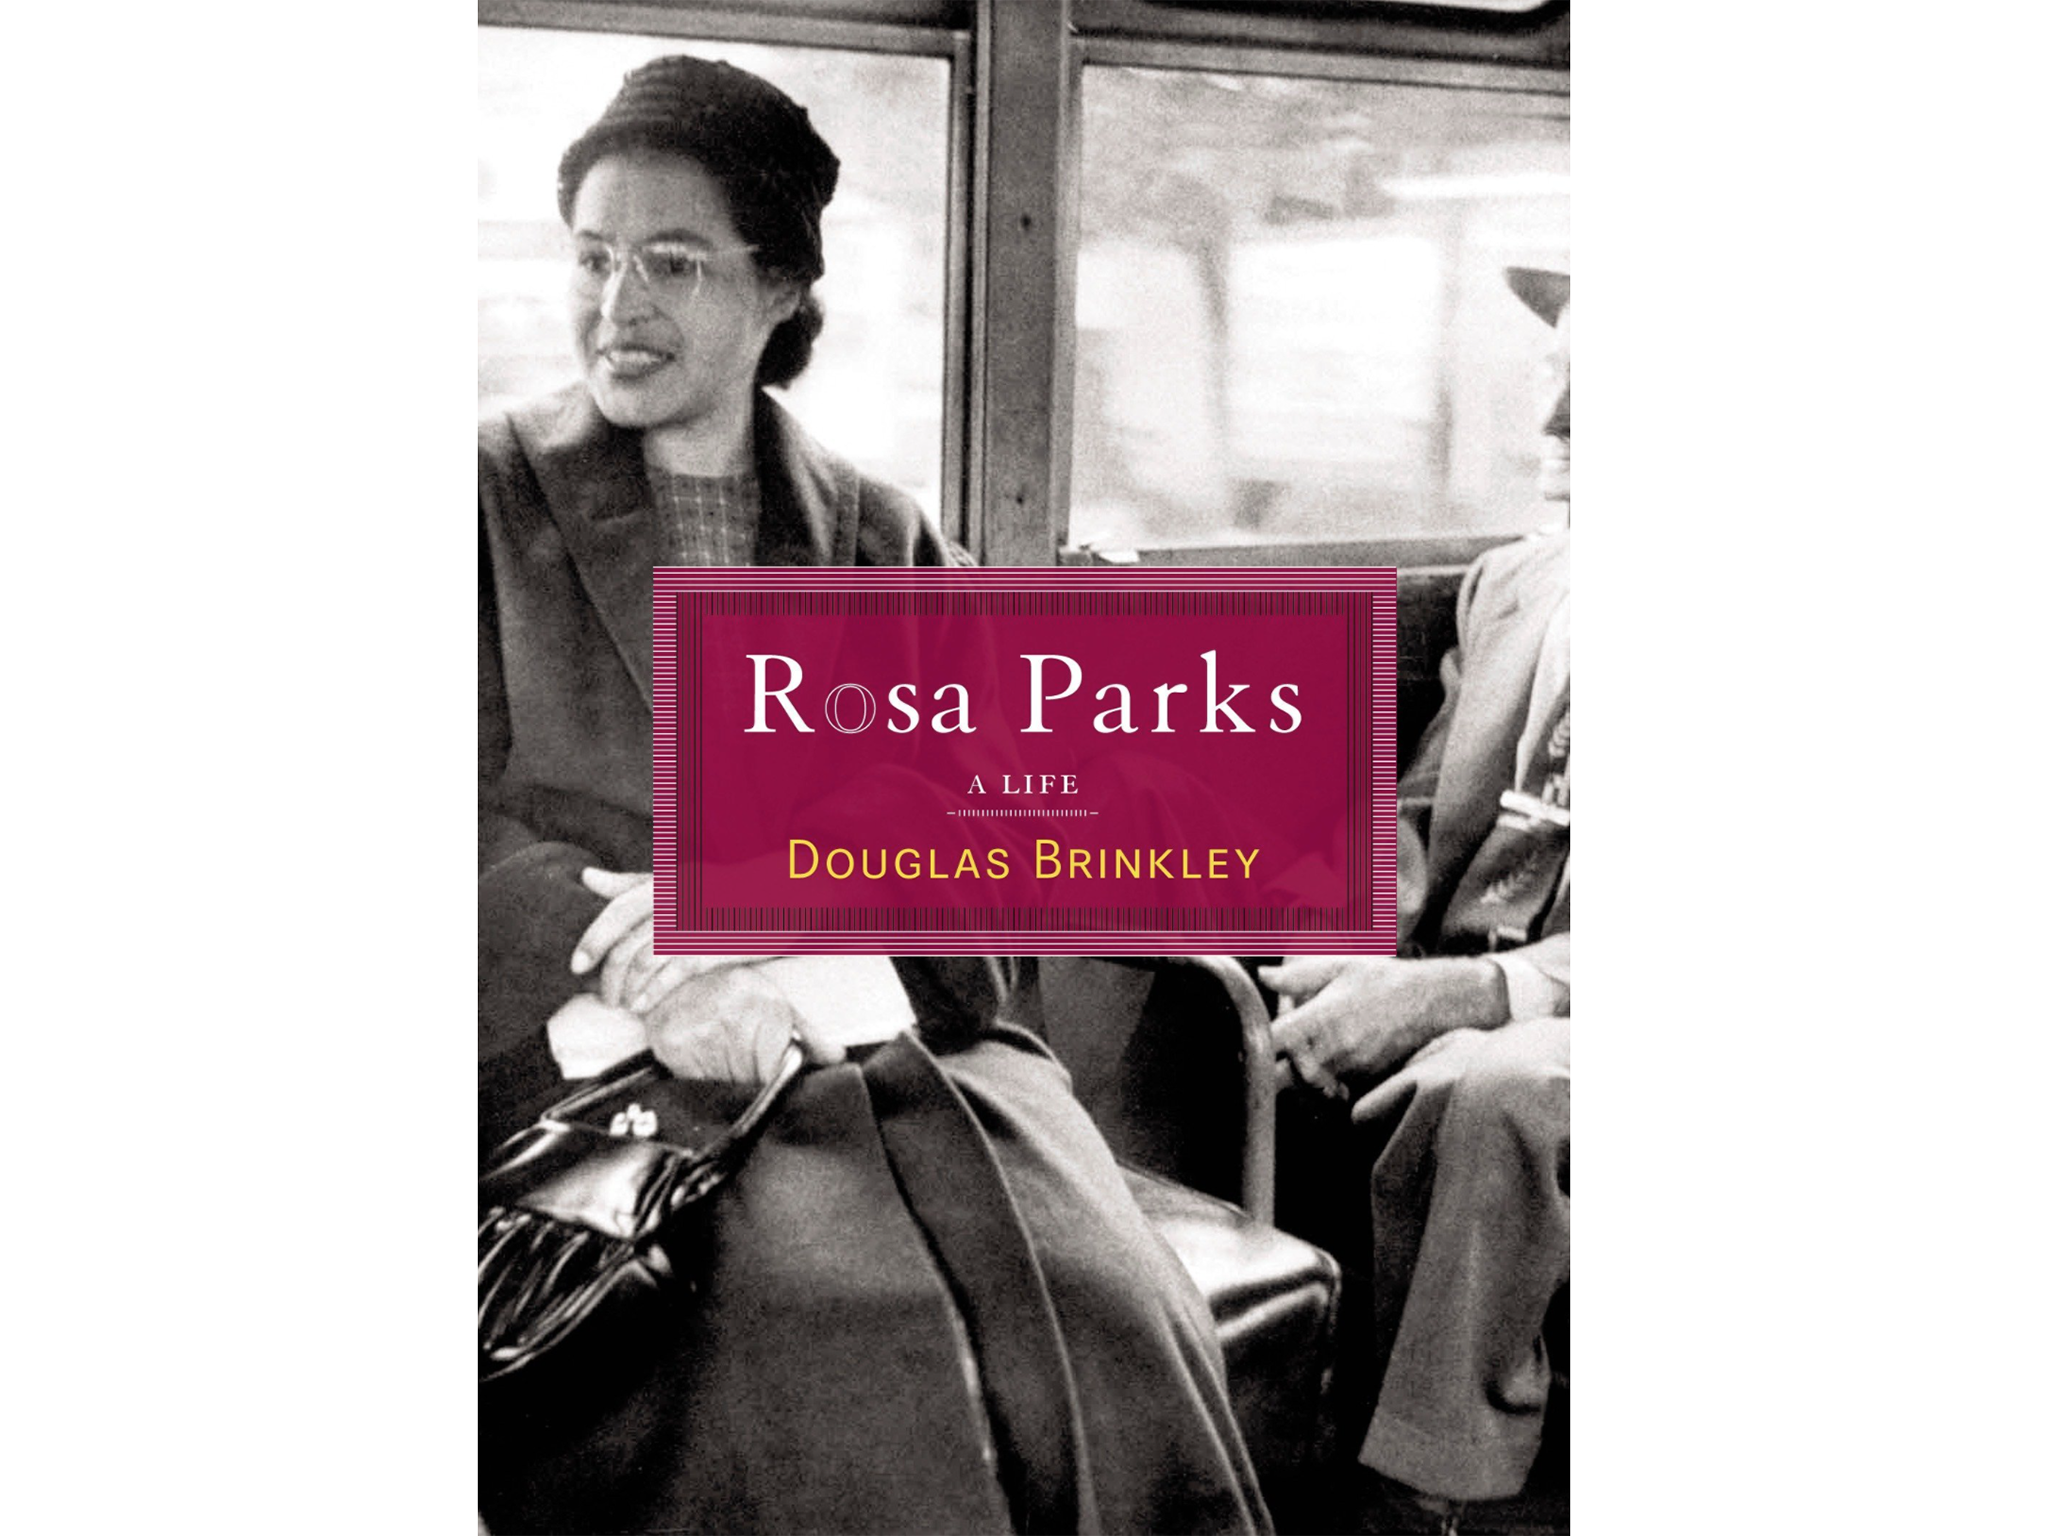 Rosa Parks: A Life indybest